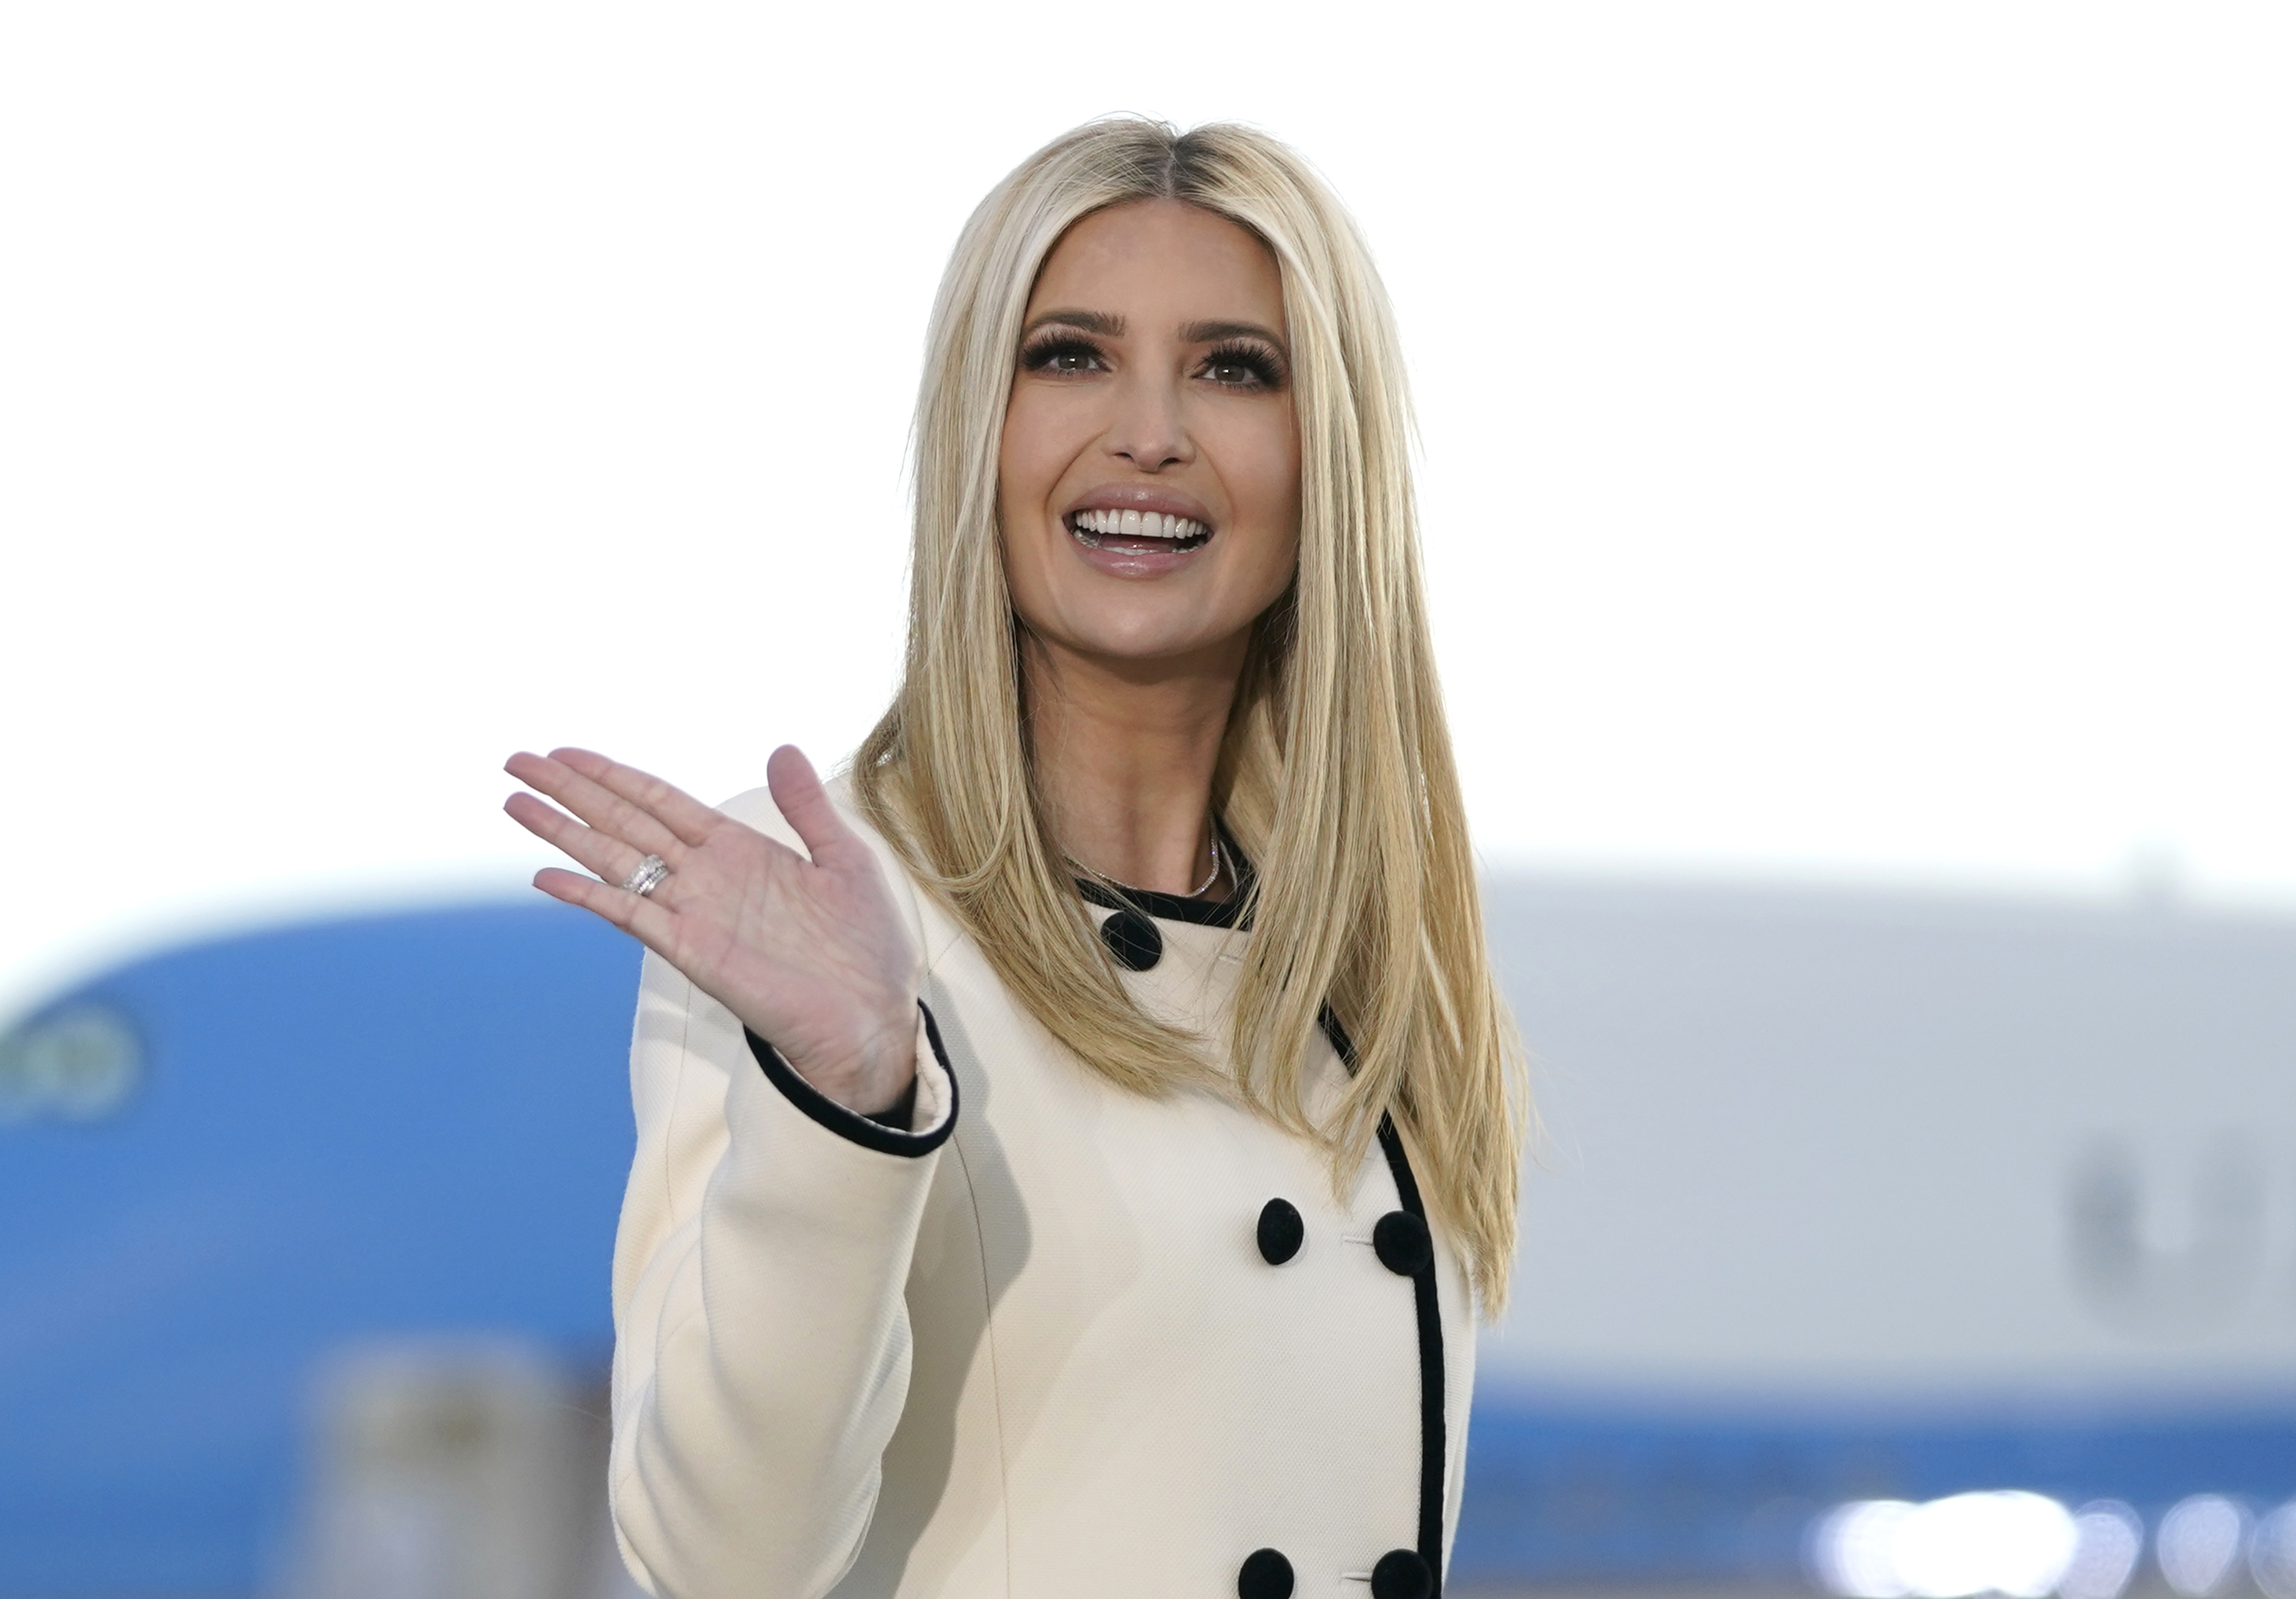 Mary Trump says her uncle will ‘stop protecting’ Ivanka if he feels it’s necessary